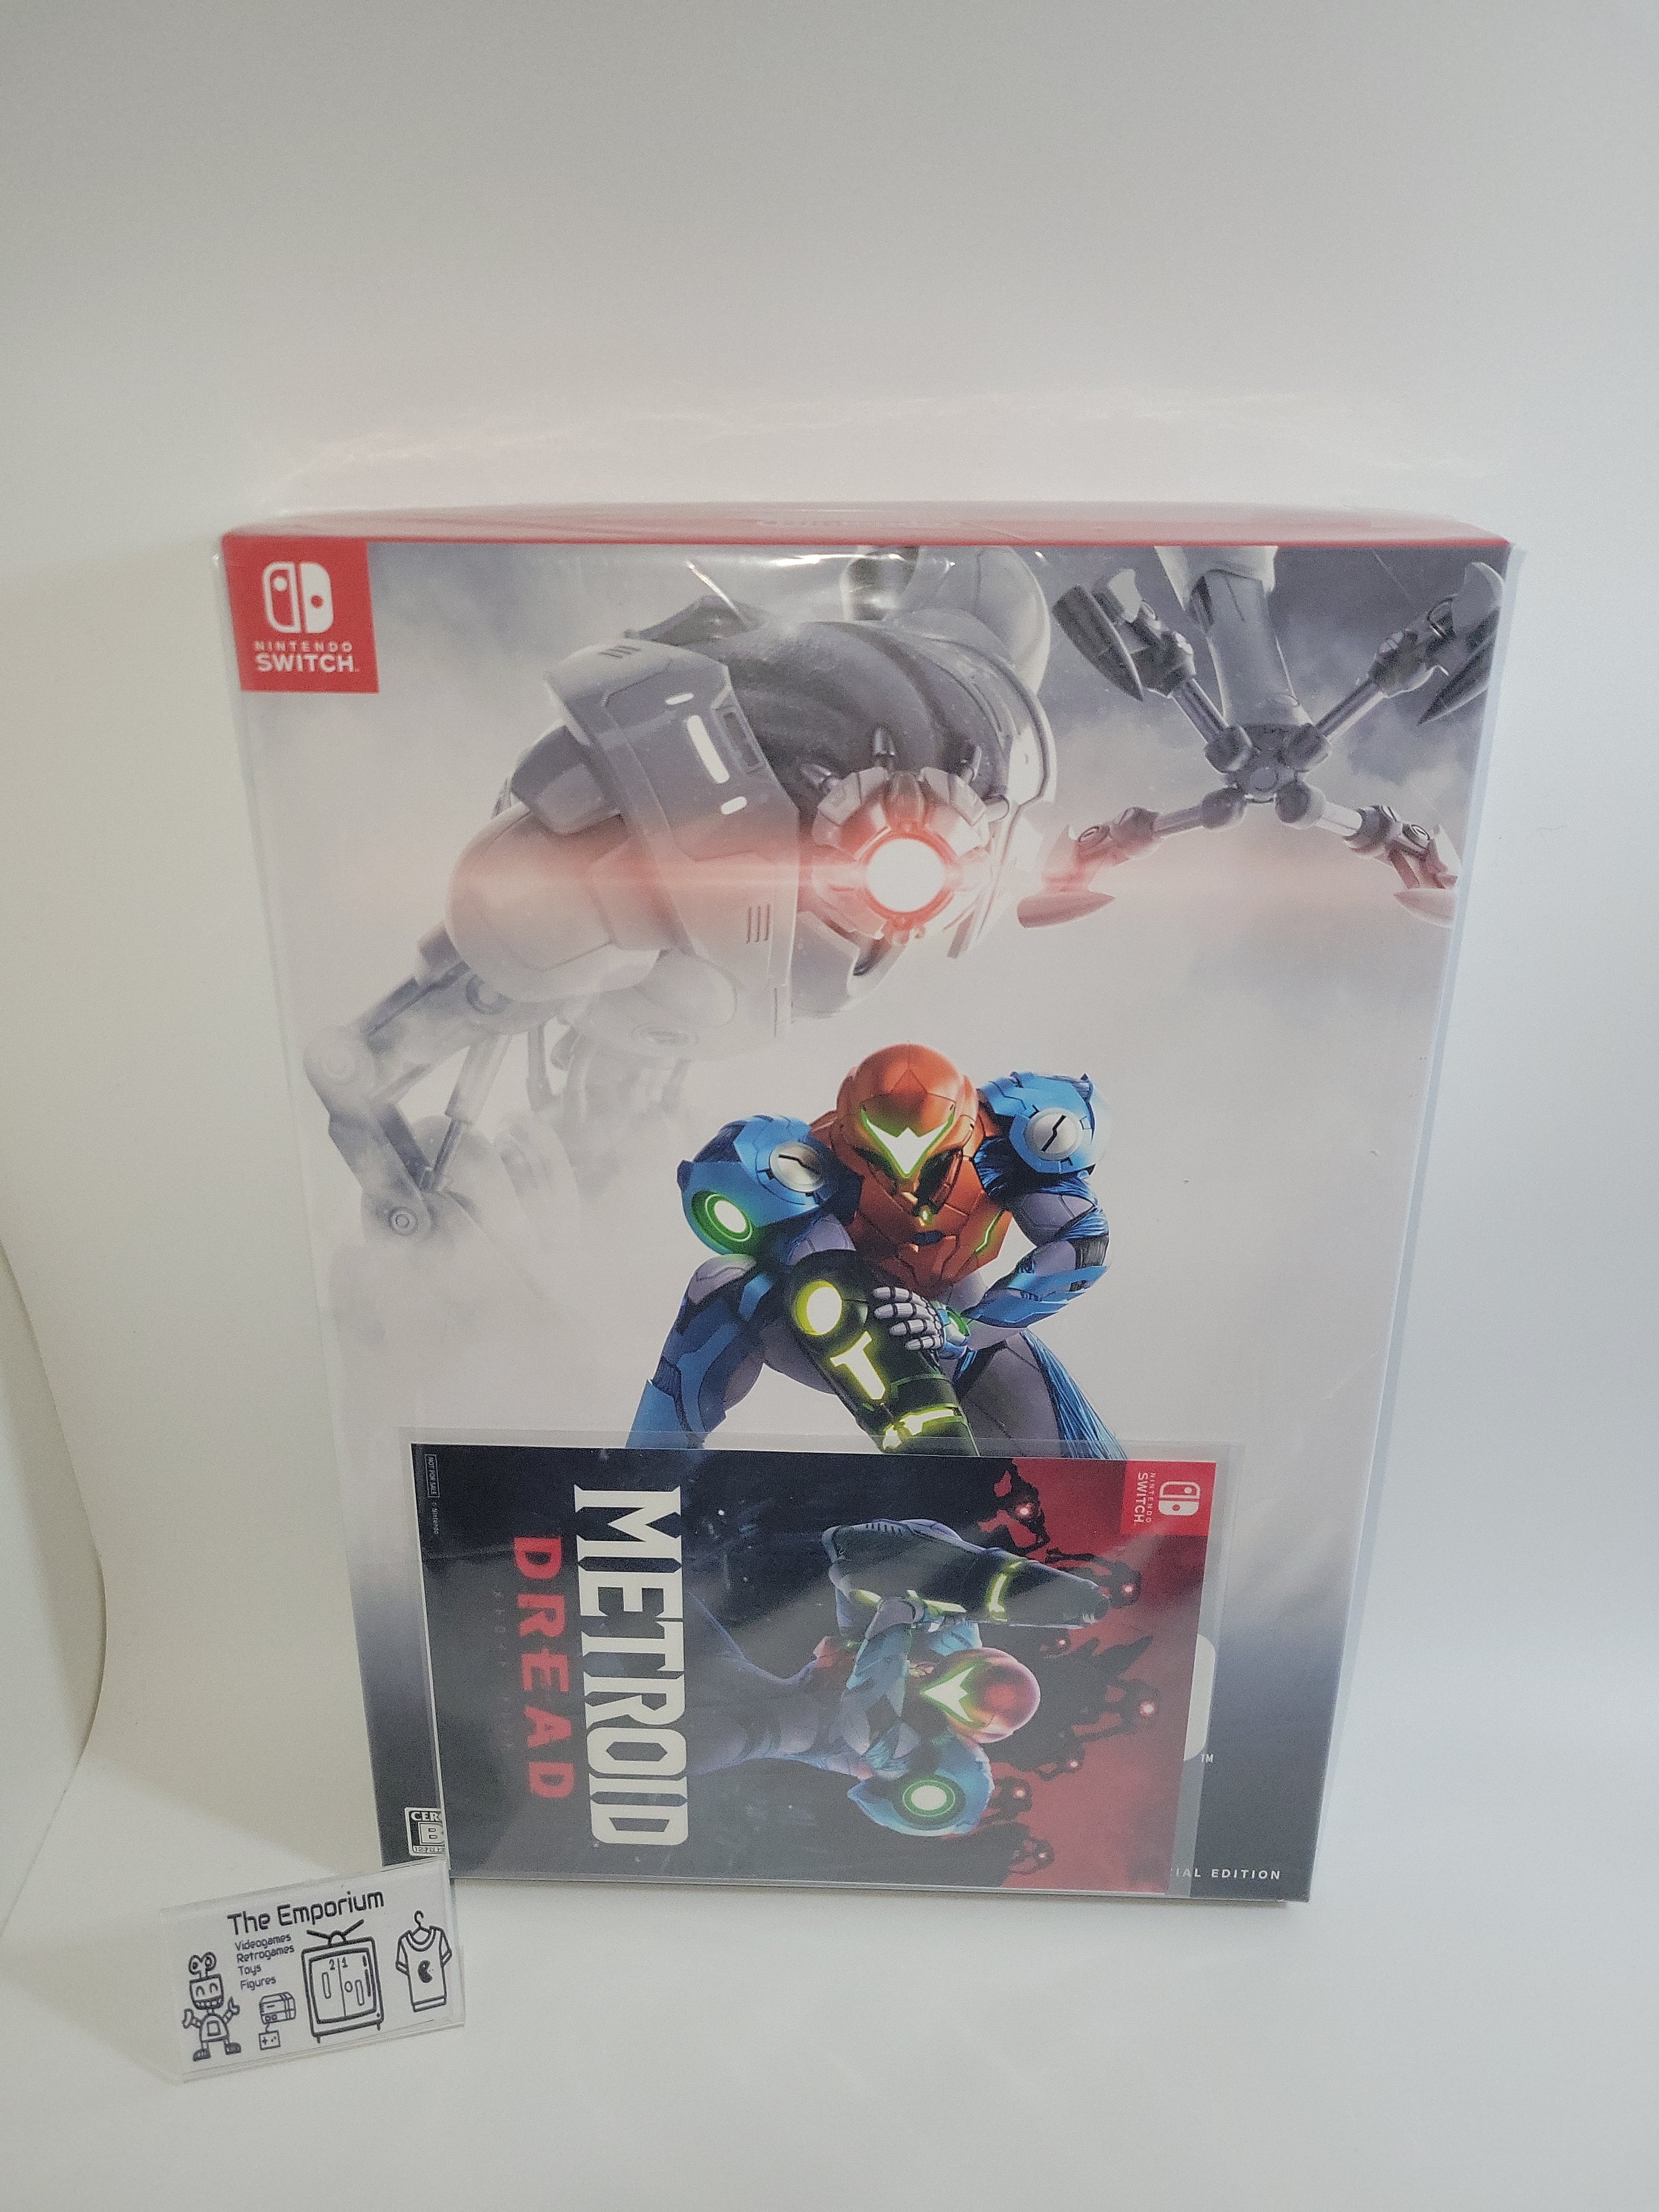 Metroid Dread [Special Edition] - Nintendo Switch NSW – The Emporium  RetroGames and Toys